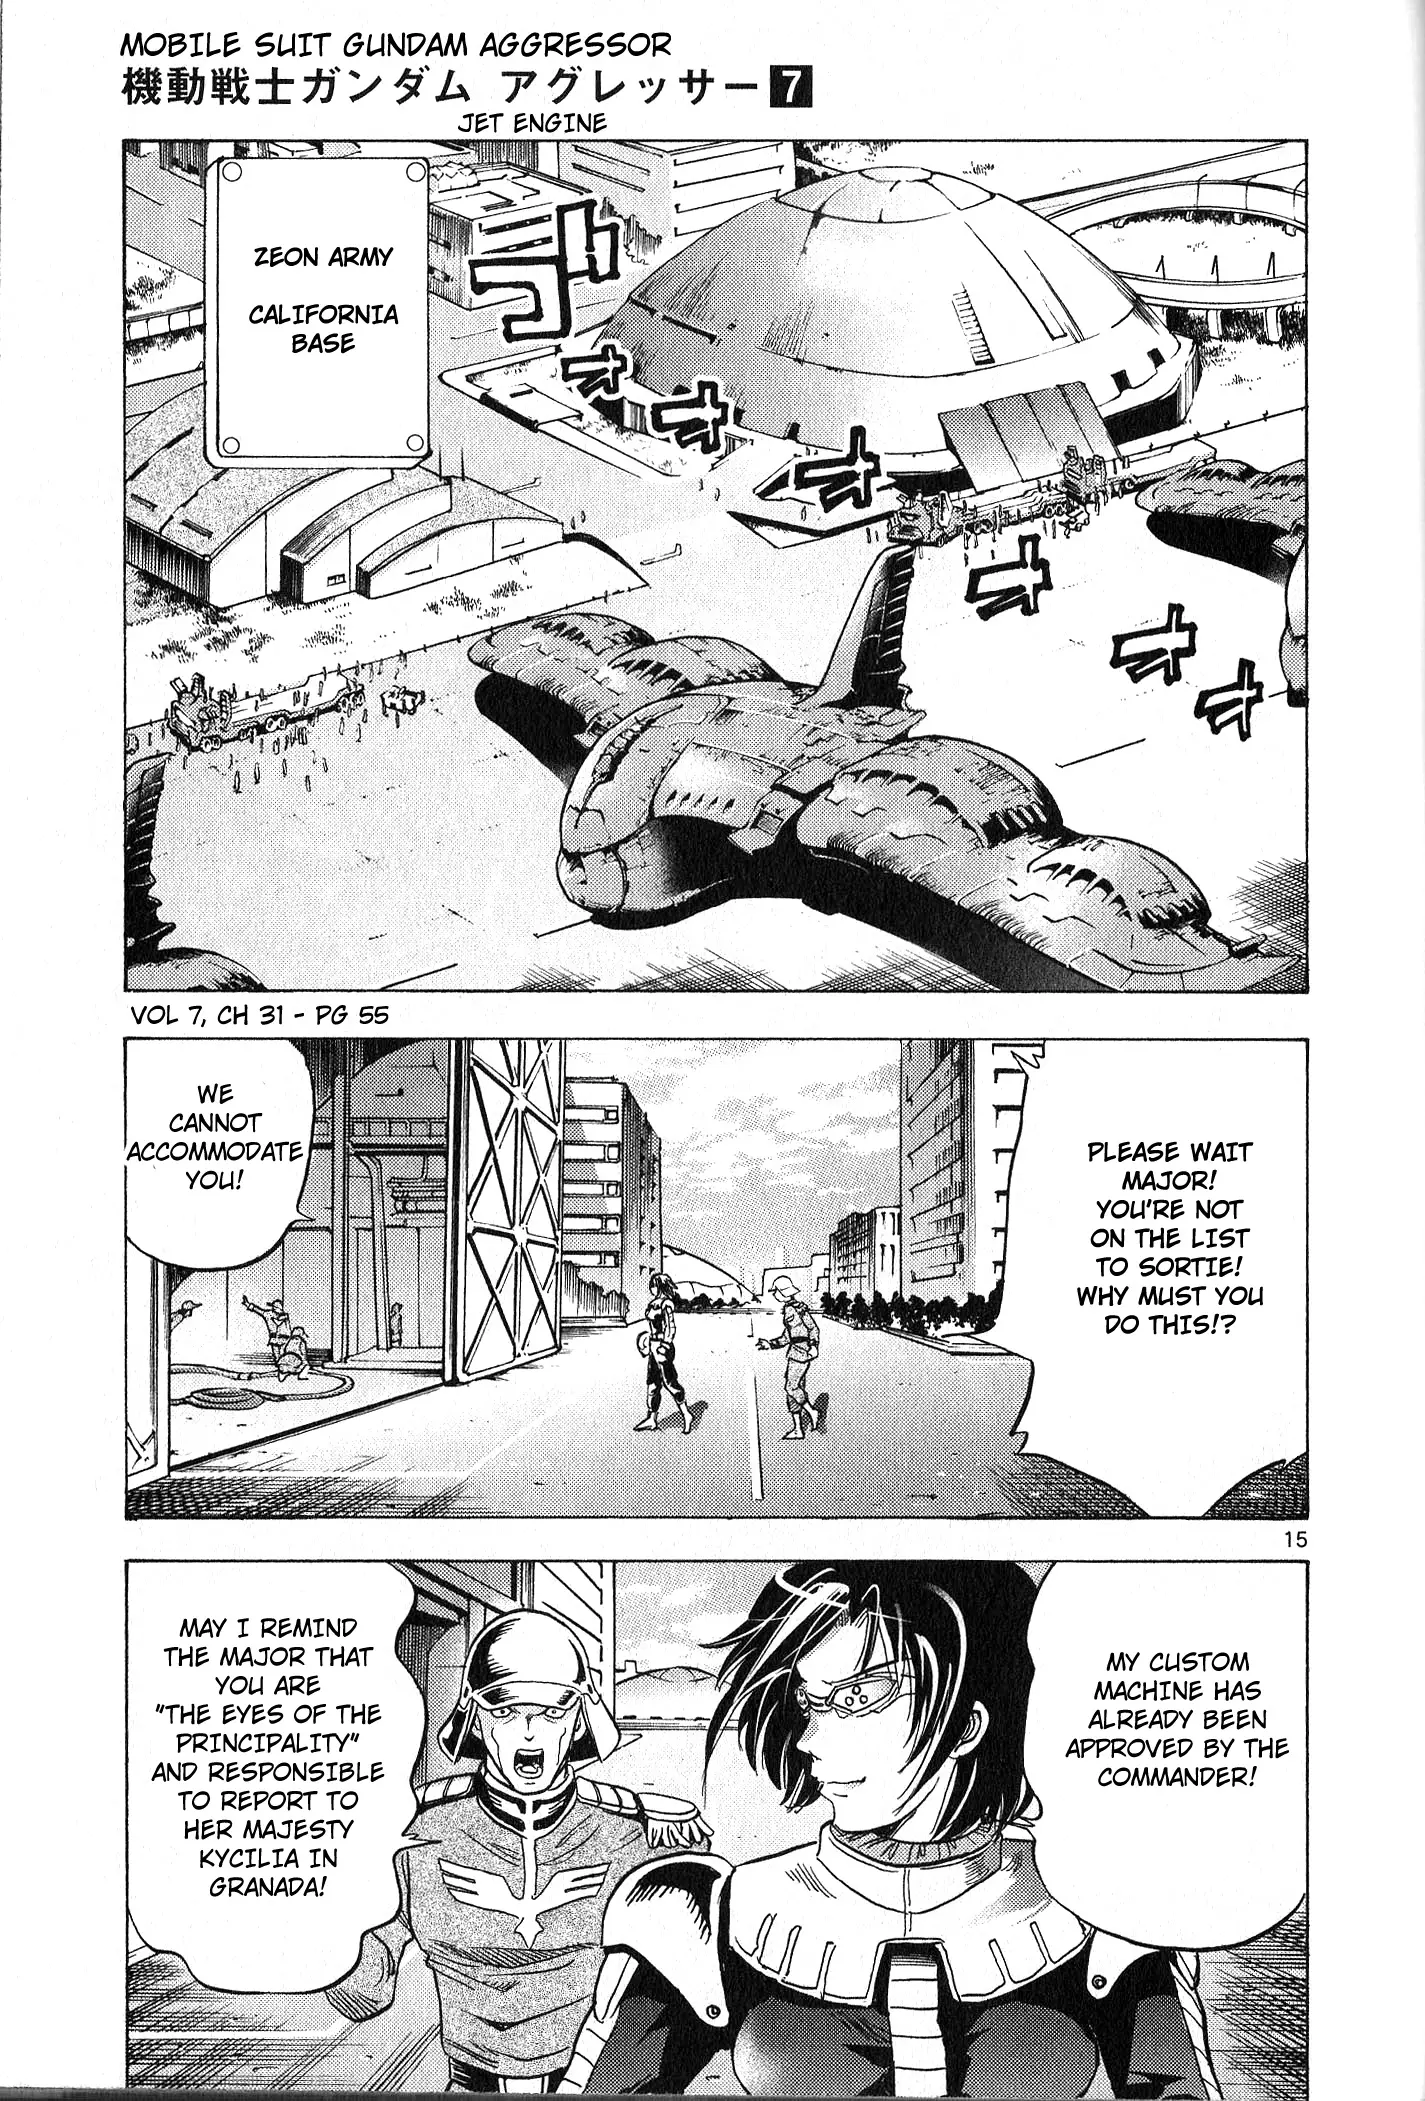 Mobile Suit Gundam Aggressor - 31 page 14-0a7b8ad8